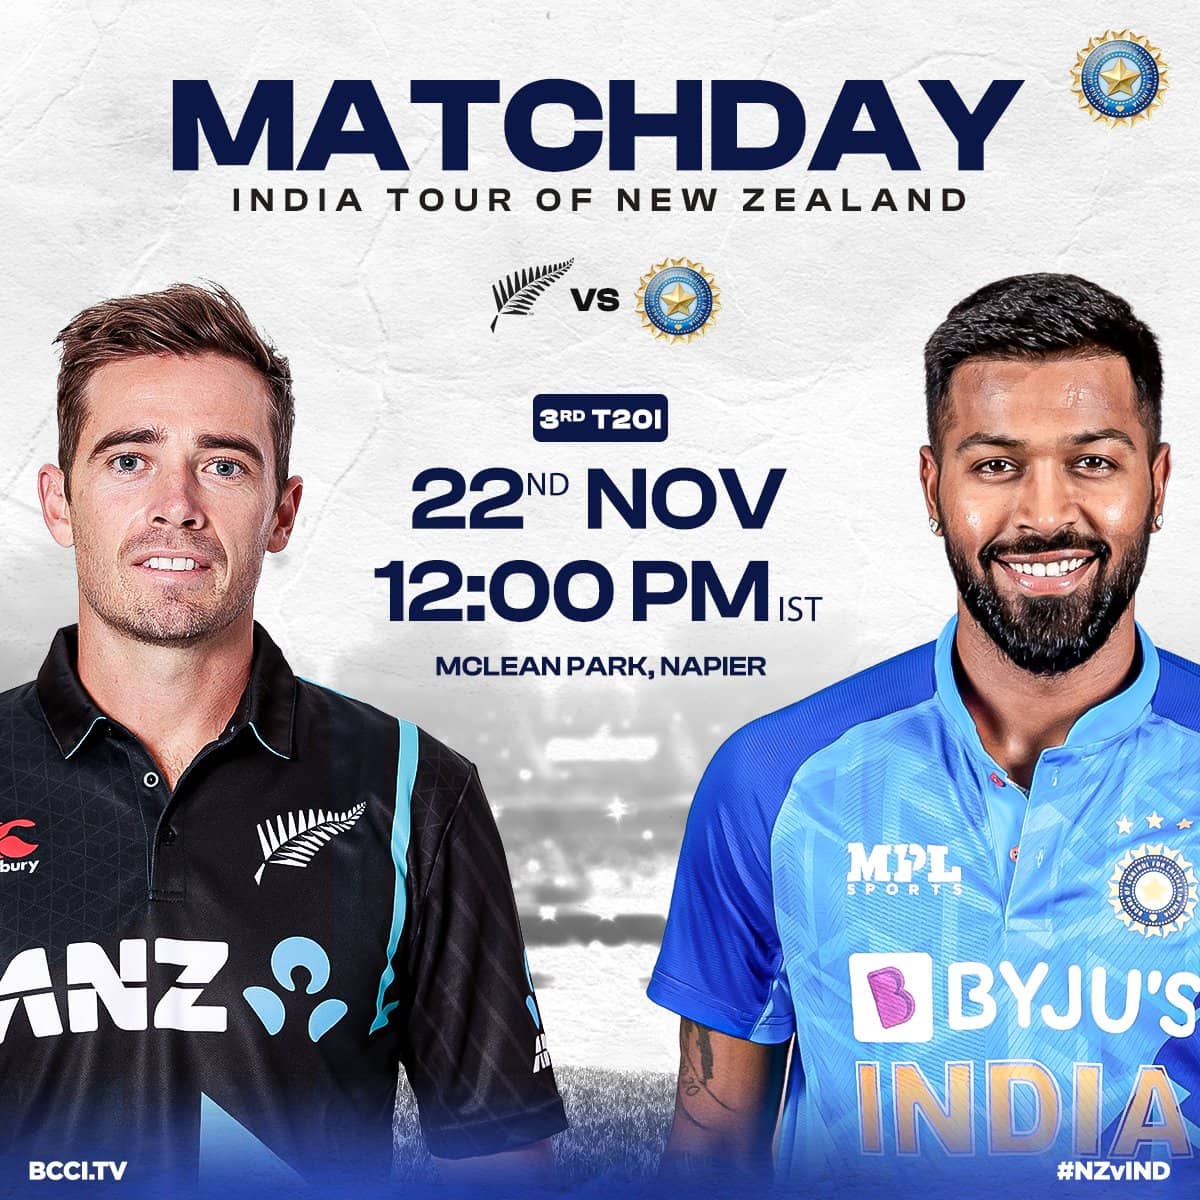 IND vs NZ 3rd T20I Series 2022 India win 3-match series against New Zealand India vs New Zealand series 2022 schedule, squad, time, venue, weather Zee Business